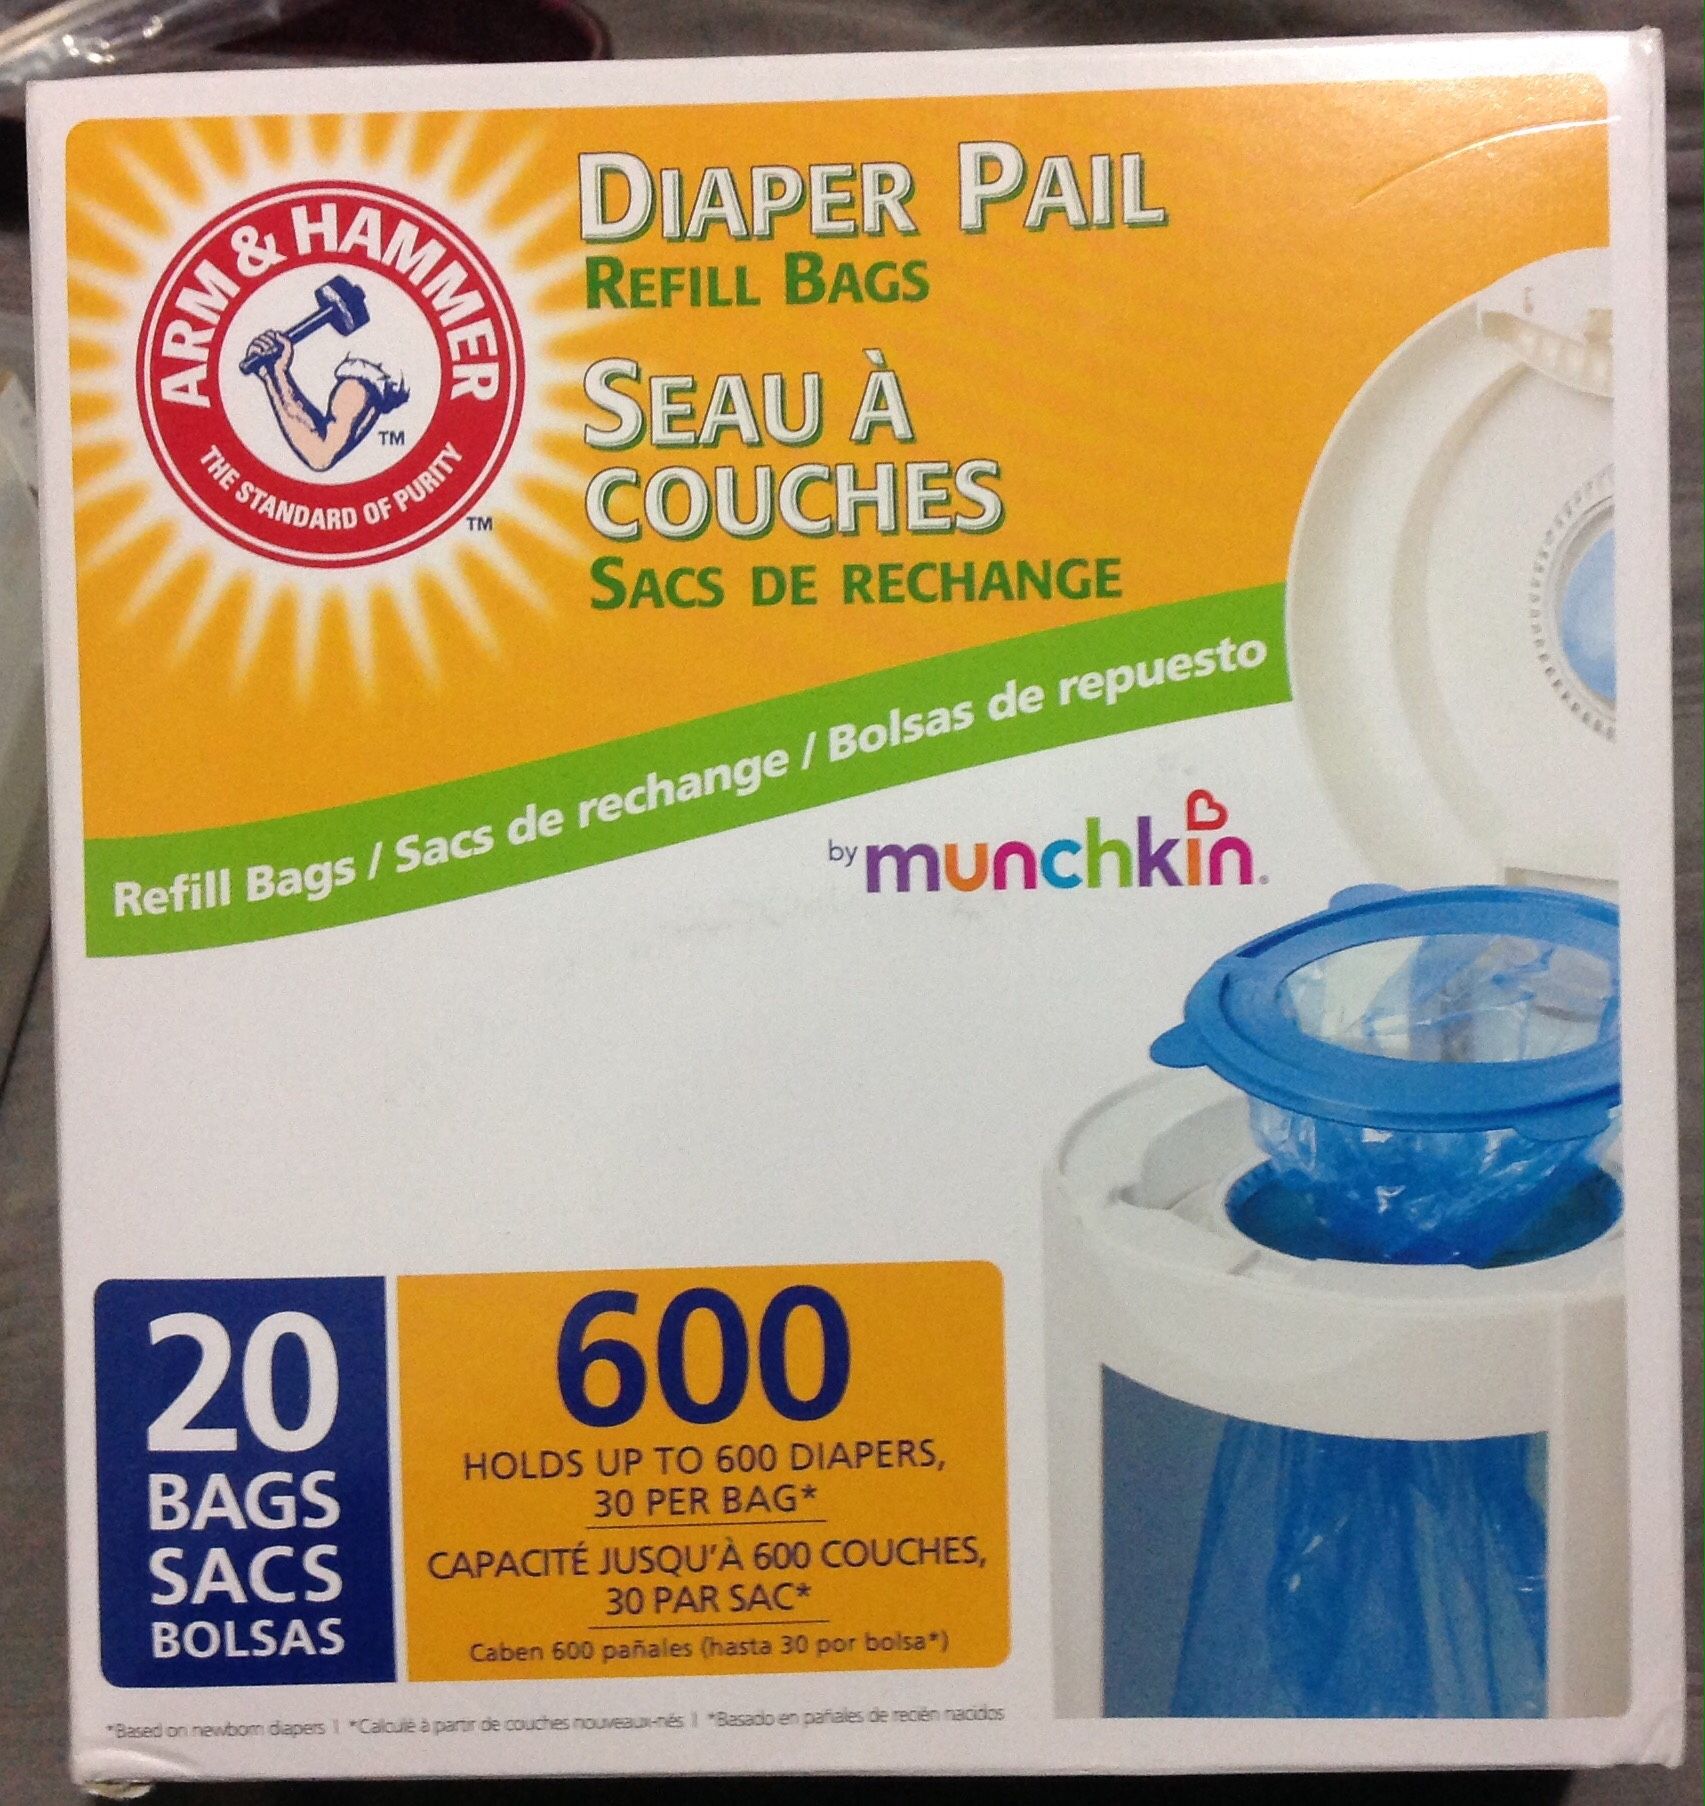 Munchkin Arm & Hammer Diaper Pail Snap, Seal and Toss Refill Bags, 20 Bags.